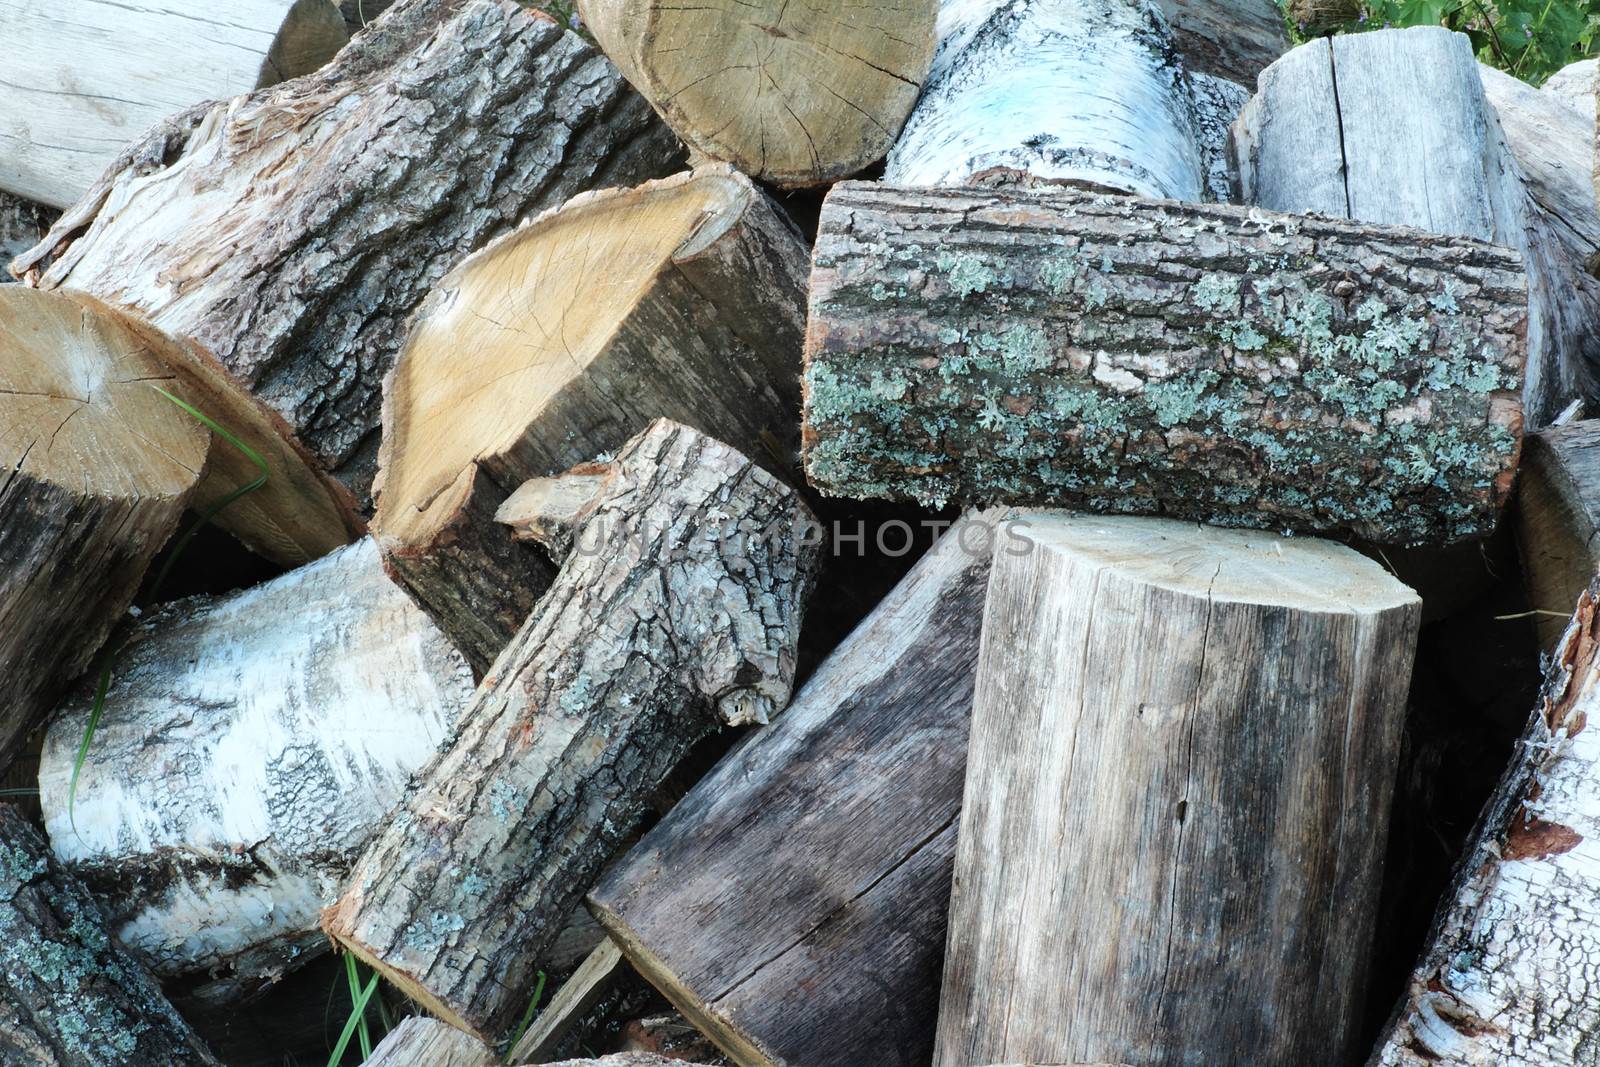 Large trunks of trees have been cut and lay on the grass. Prepared for the manufacture of wood.